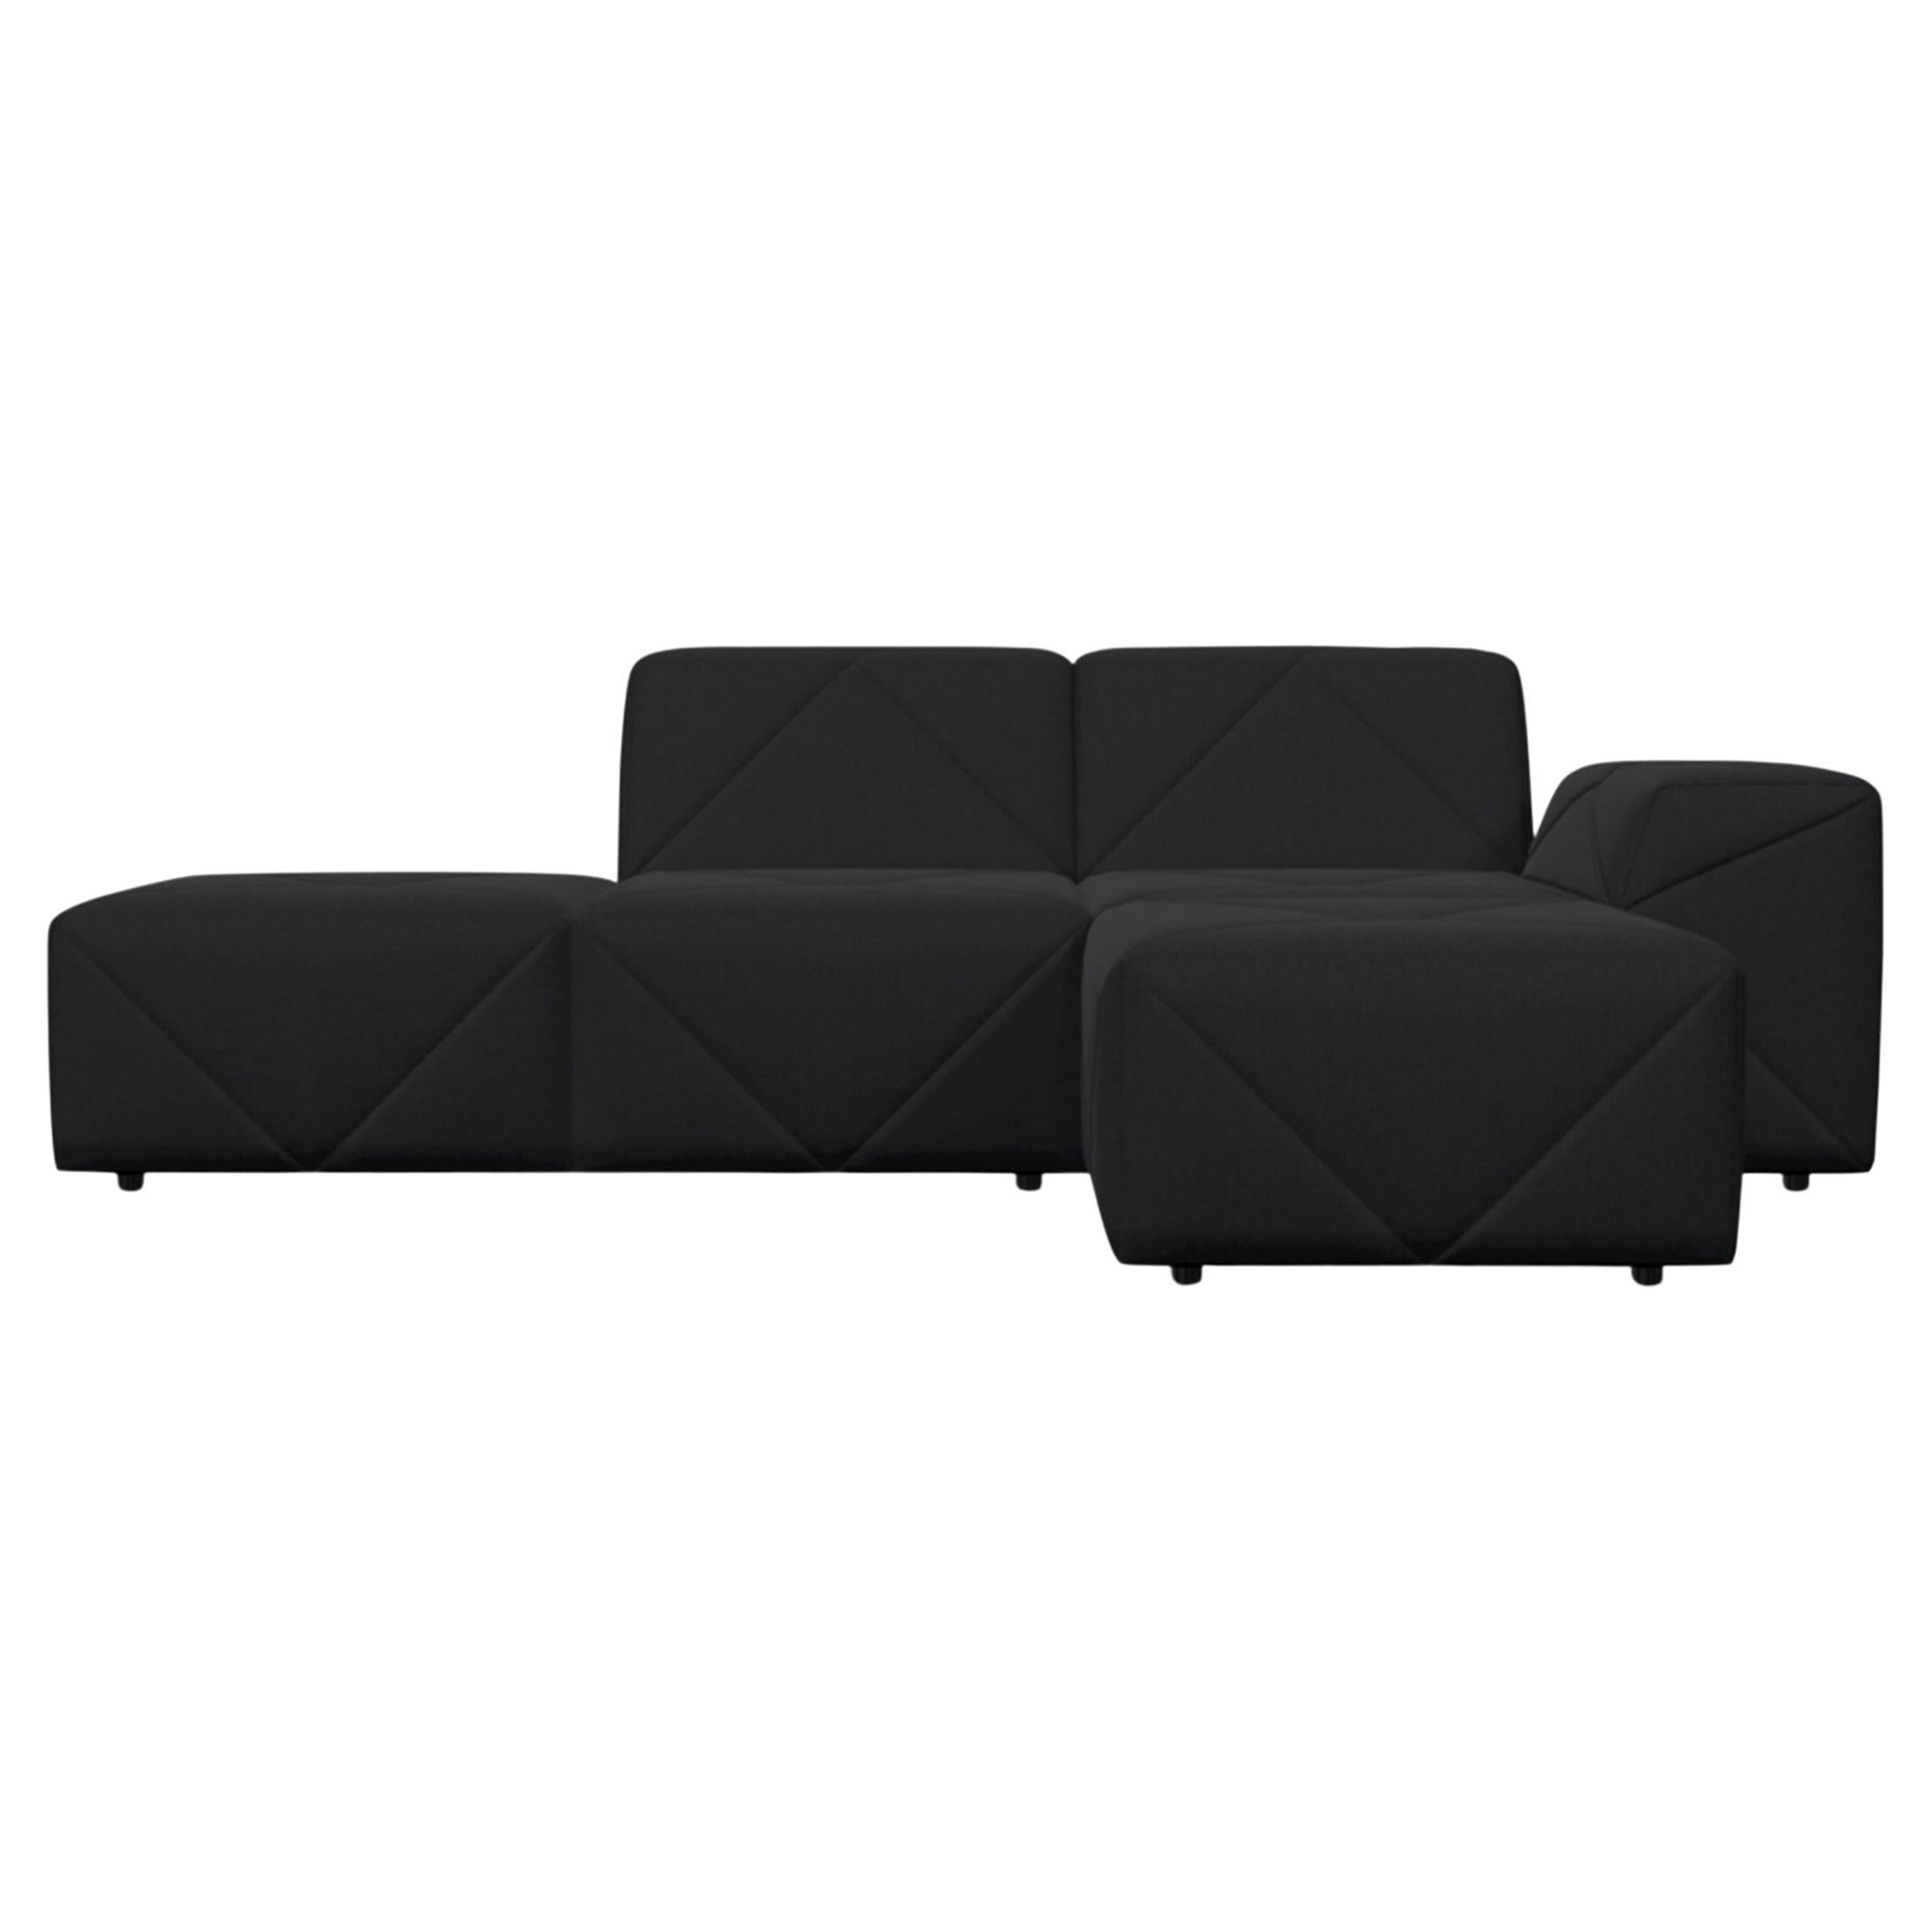 Moooi BFF Right Arm Chaise Longue Sofa in Justo, Bazalt Upholstery